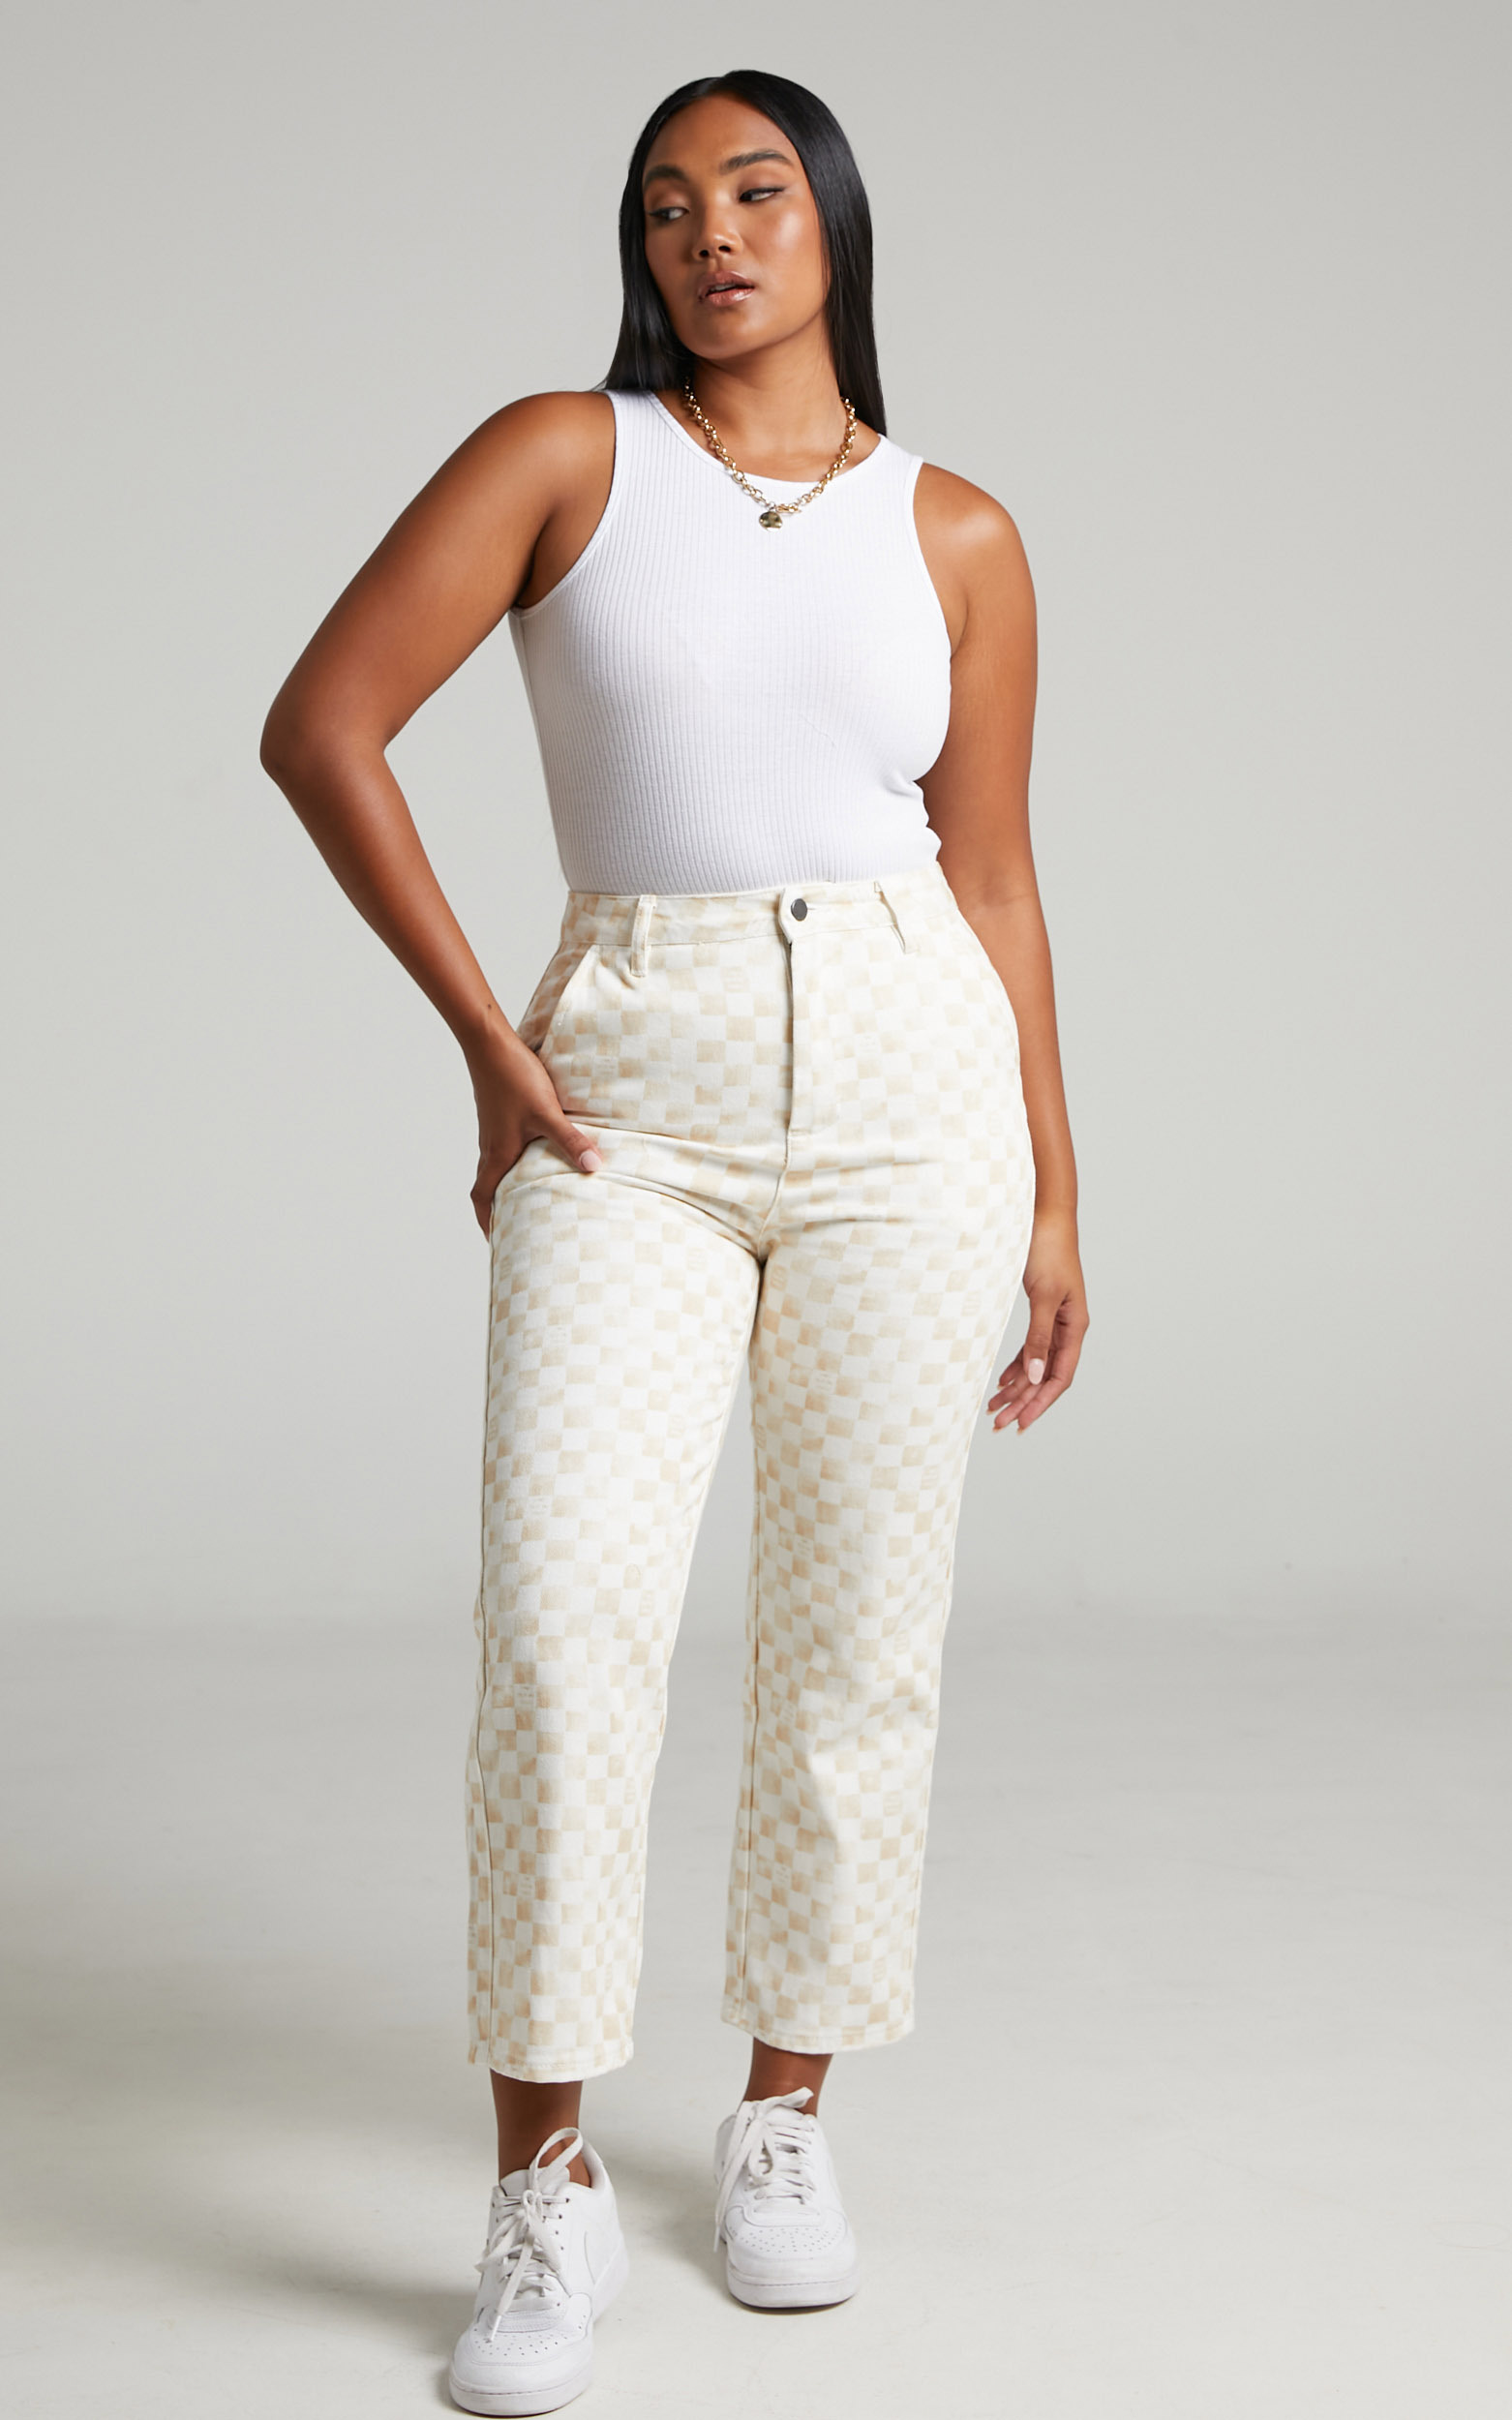 Cools Club - California Pant in Sand Checker - 06, BRN1, hi-res image number null